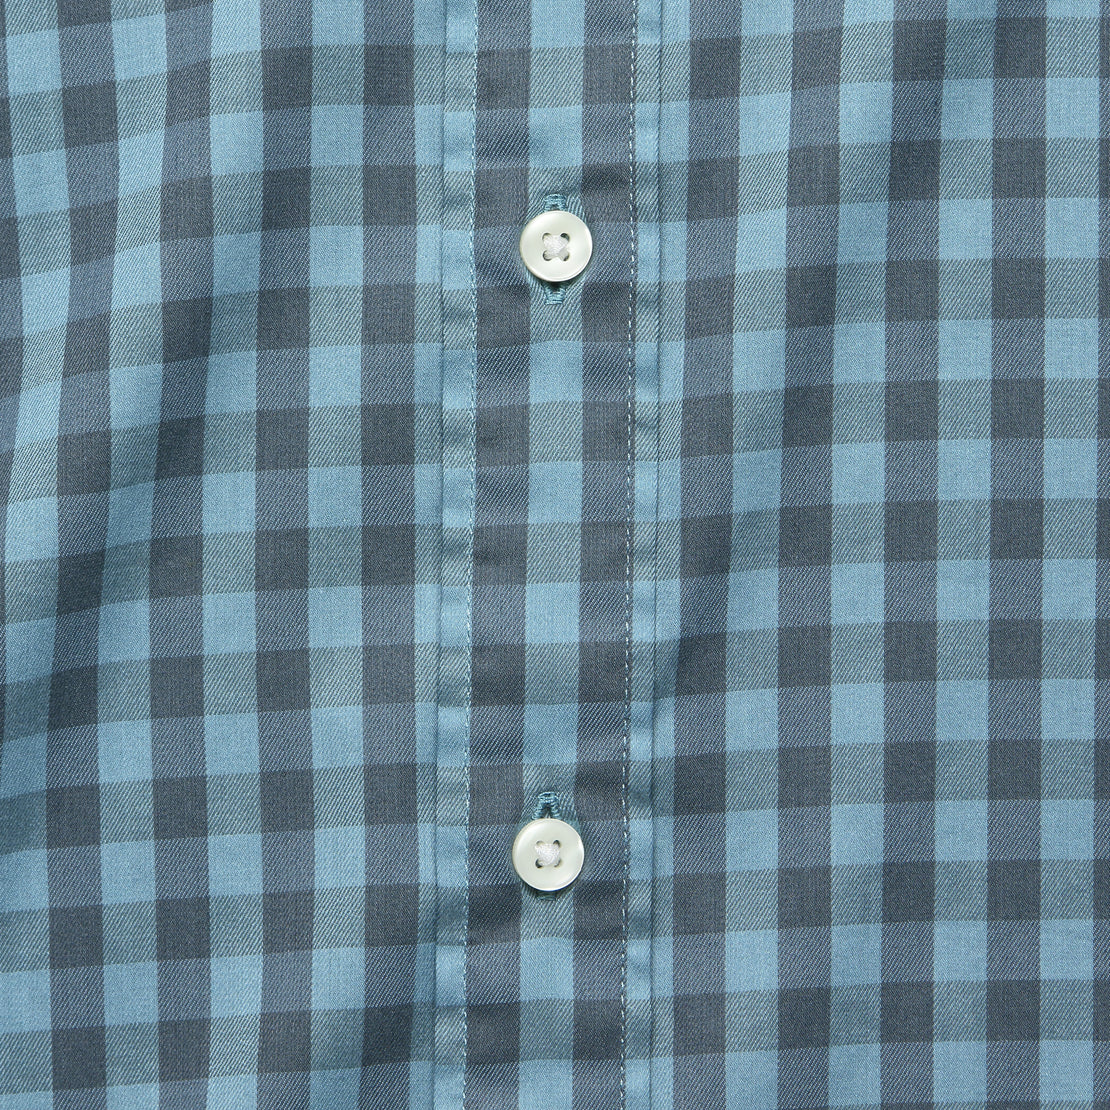 Movement Shirt - Stormy Shore Gingham - Faherty - STAG Provisions - Tops - L/S Woven - Plaid